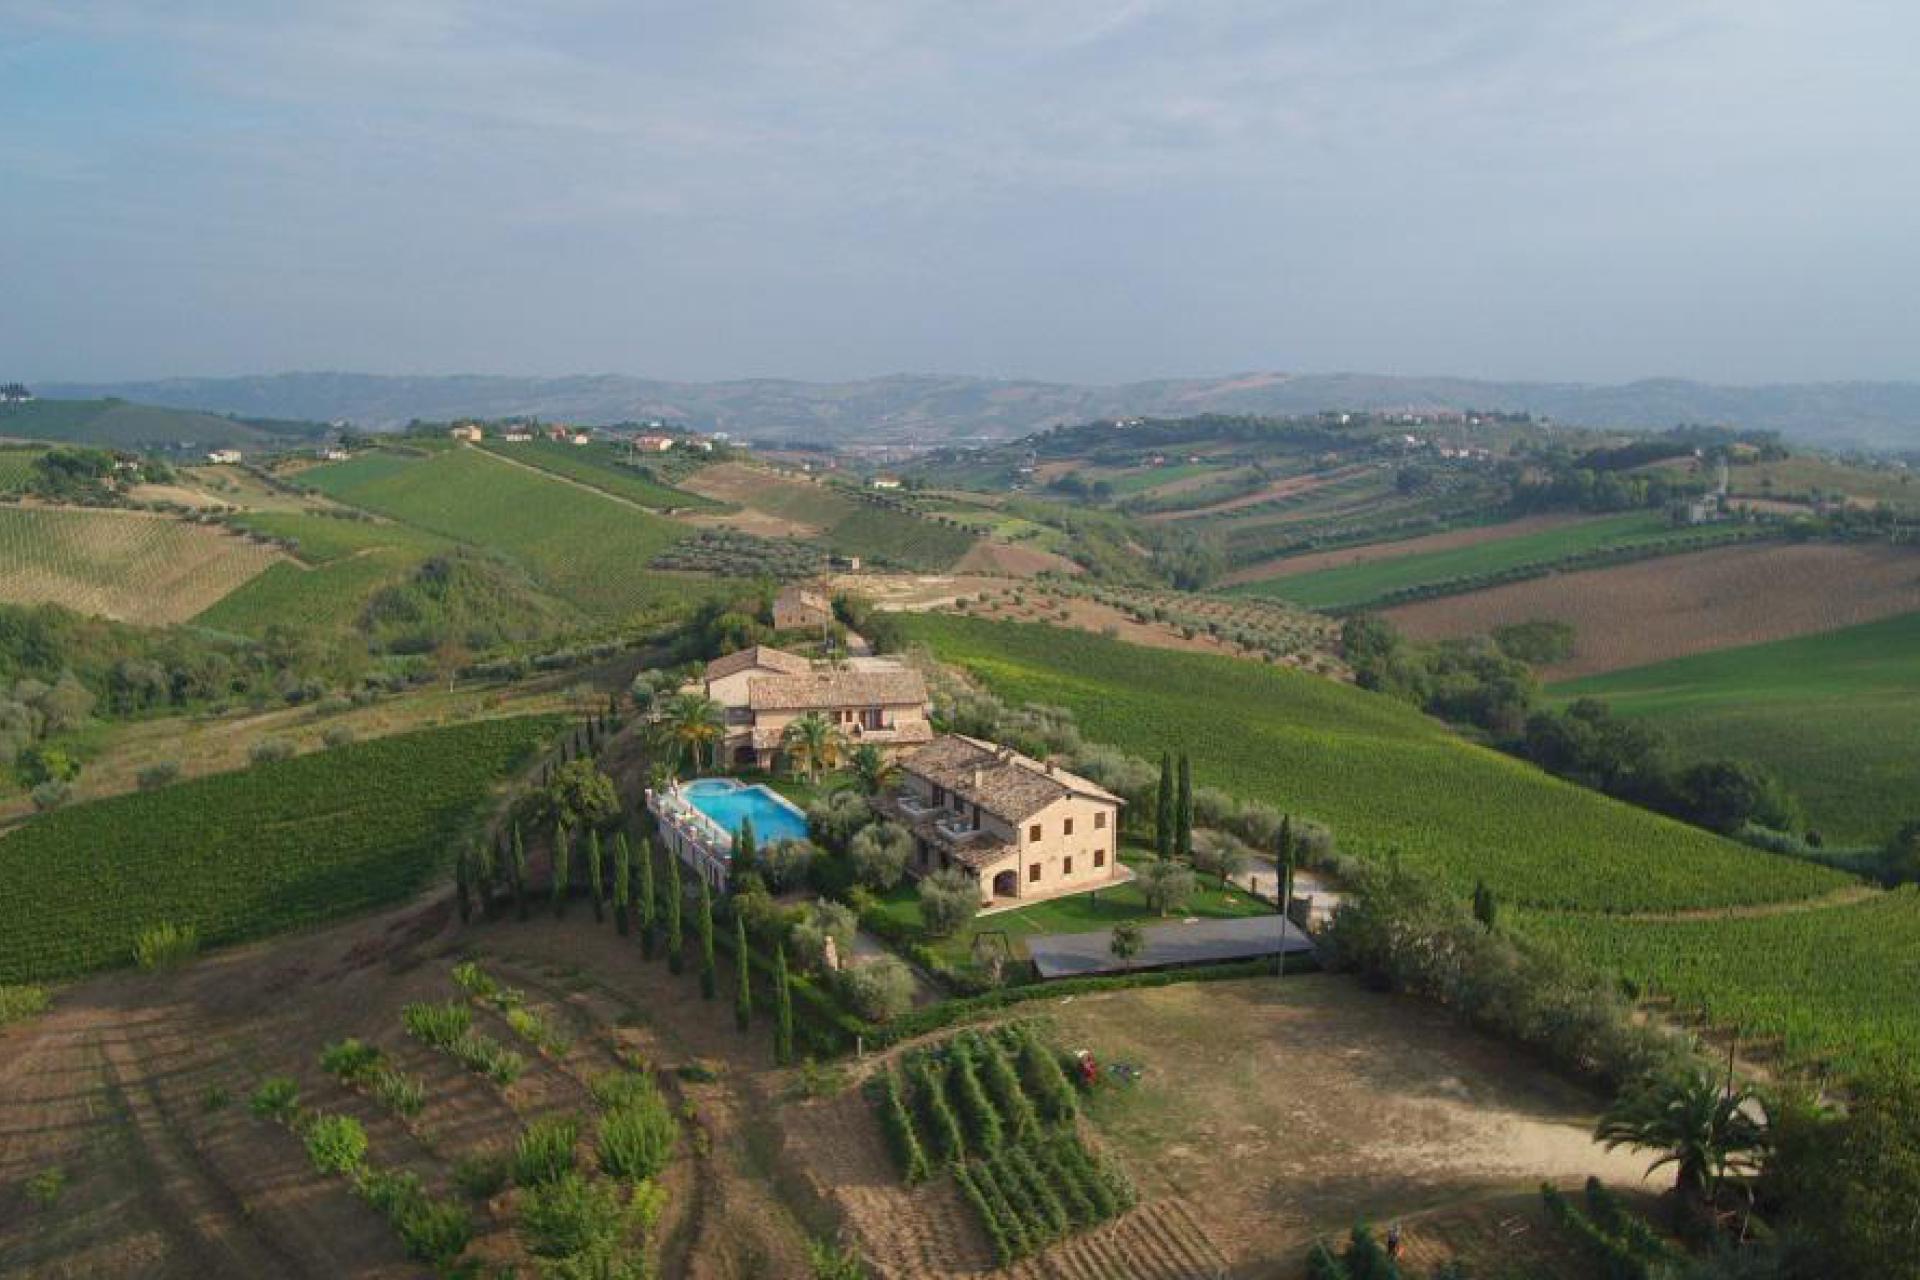 Agriturismo Marche Agriturismo le Marche, welcoming and child friendly